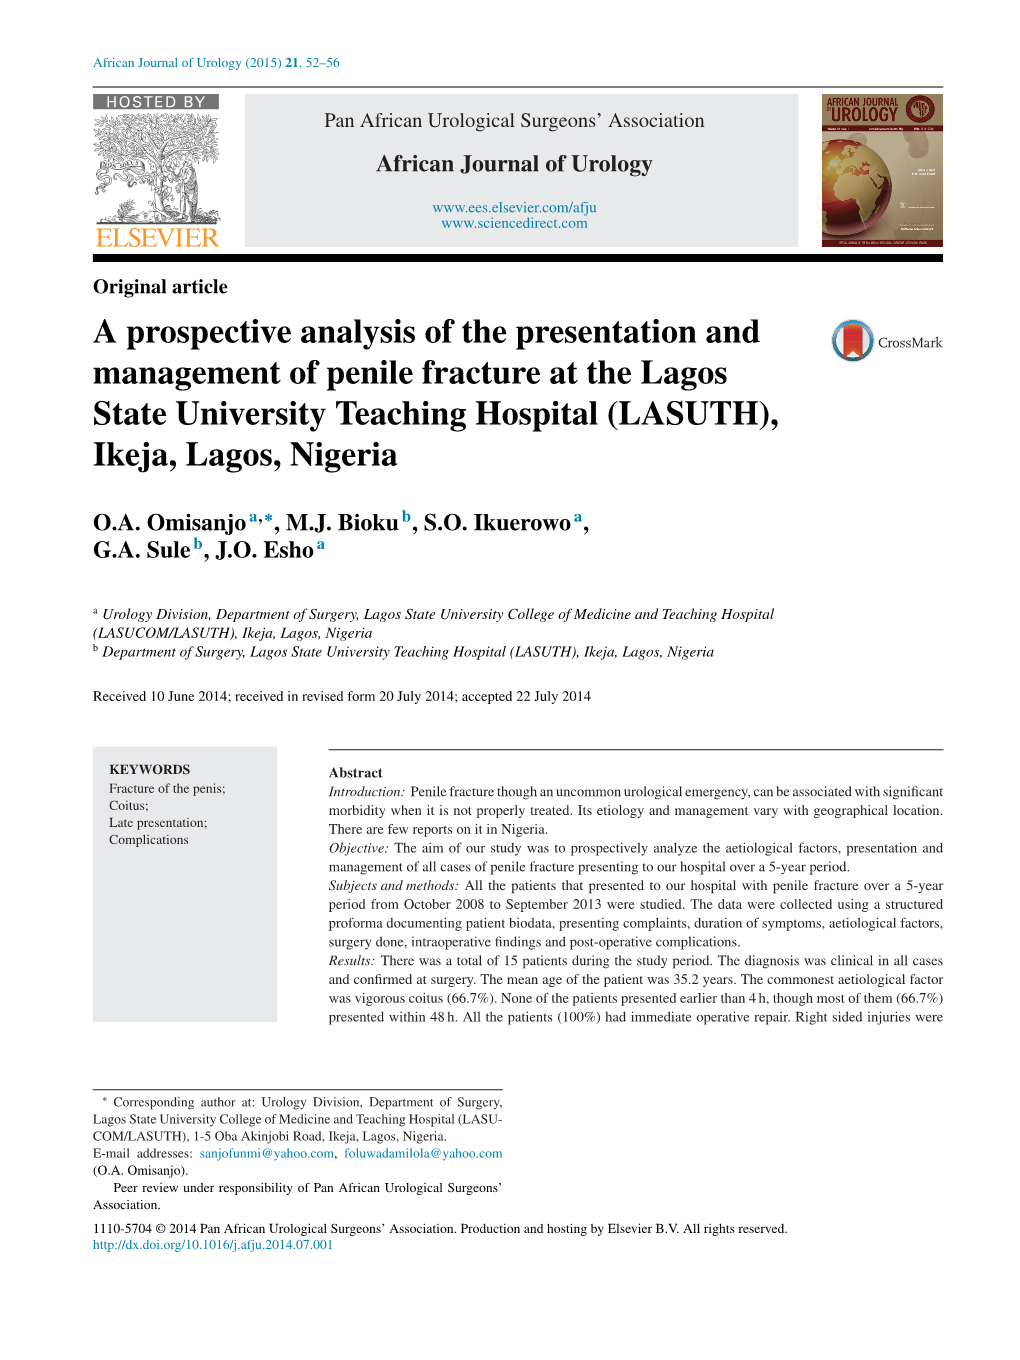 A Prospective Analysis of the Presentation and Management of Penile Fracture at the Lagos State University Teaching Hospital